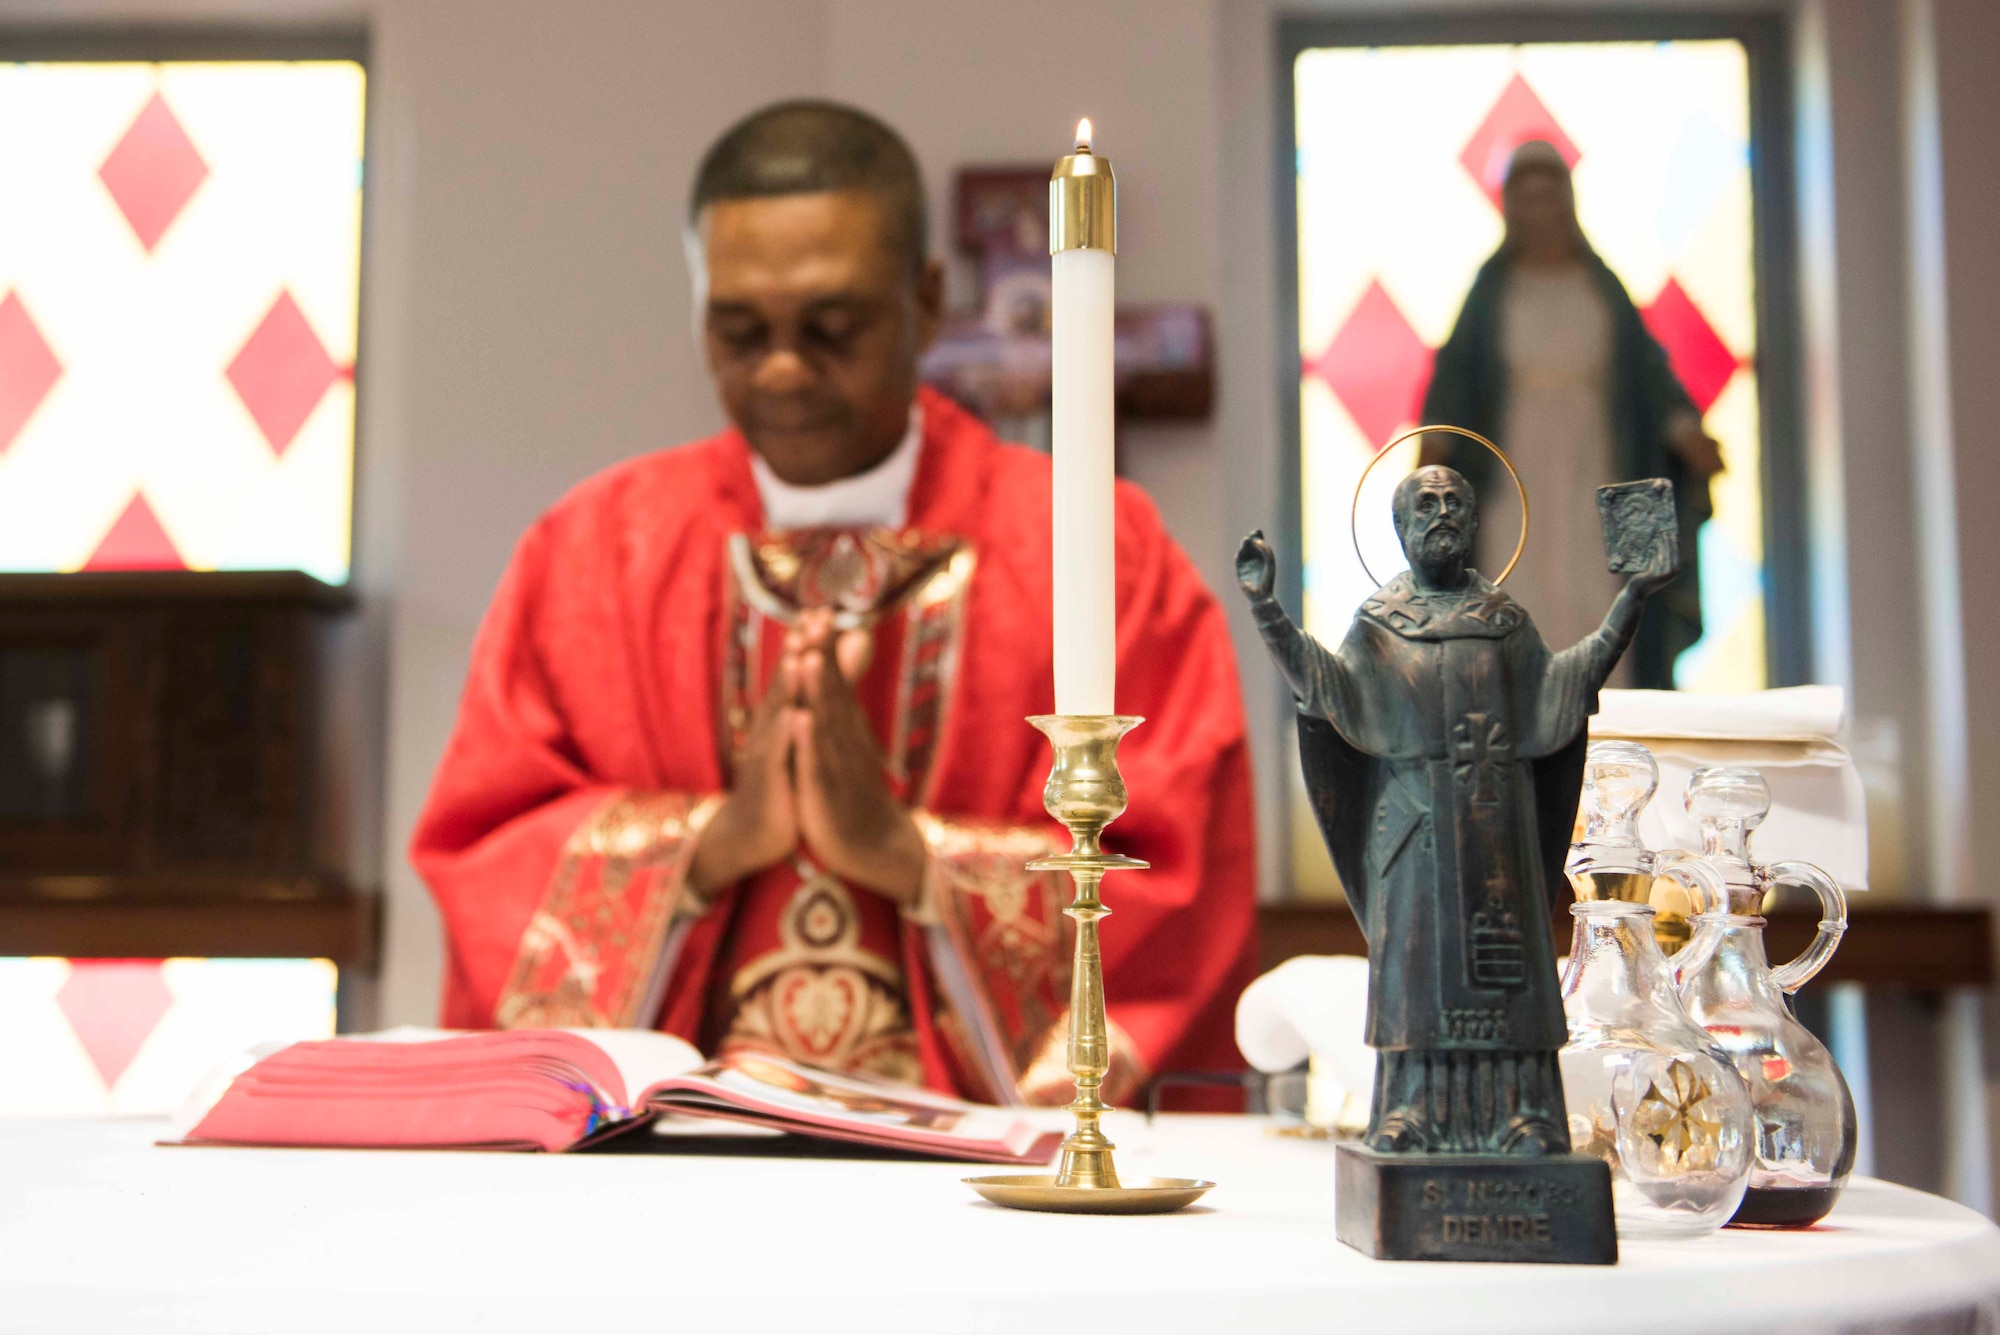 U.S. Air Force Maj. Paul Amaliri, 39th Air Base Wing deputy wing chaplain, celebrates a Catholic service in honor of St. Nicholas, whose statue stands on the altar Dec. 6, 2019, at Incirlik Air Base, Turkey. St. Nicholas served as a Christian bishop within the borders of modern-day Turkey and is the historical inspiration for the mythical Christmas figure, Santa Claus. (U.S. Air Force photo by Staff Sgt. Joshua Magbanua)